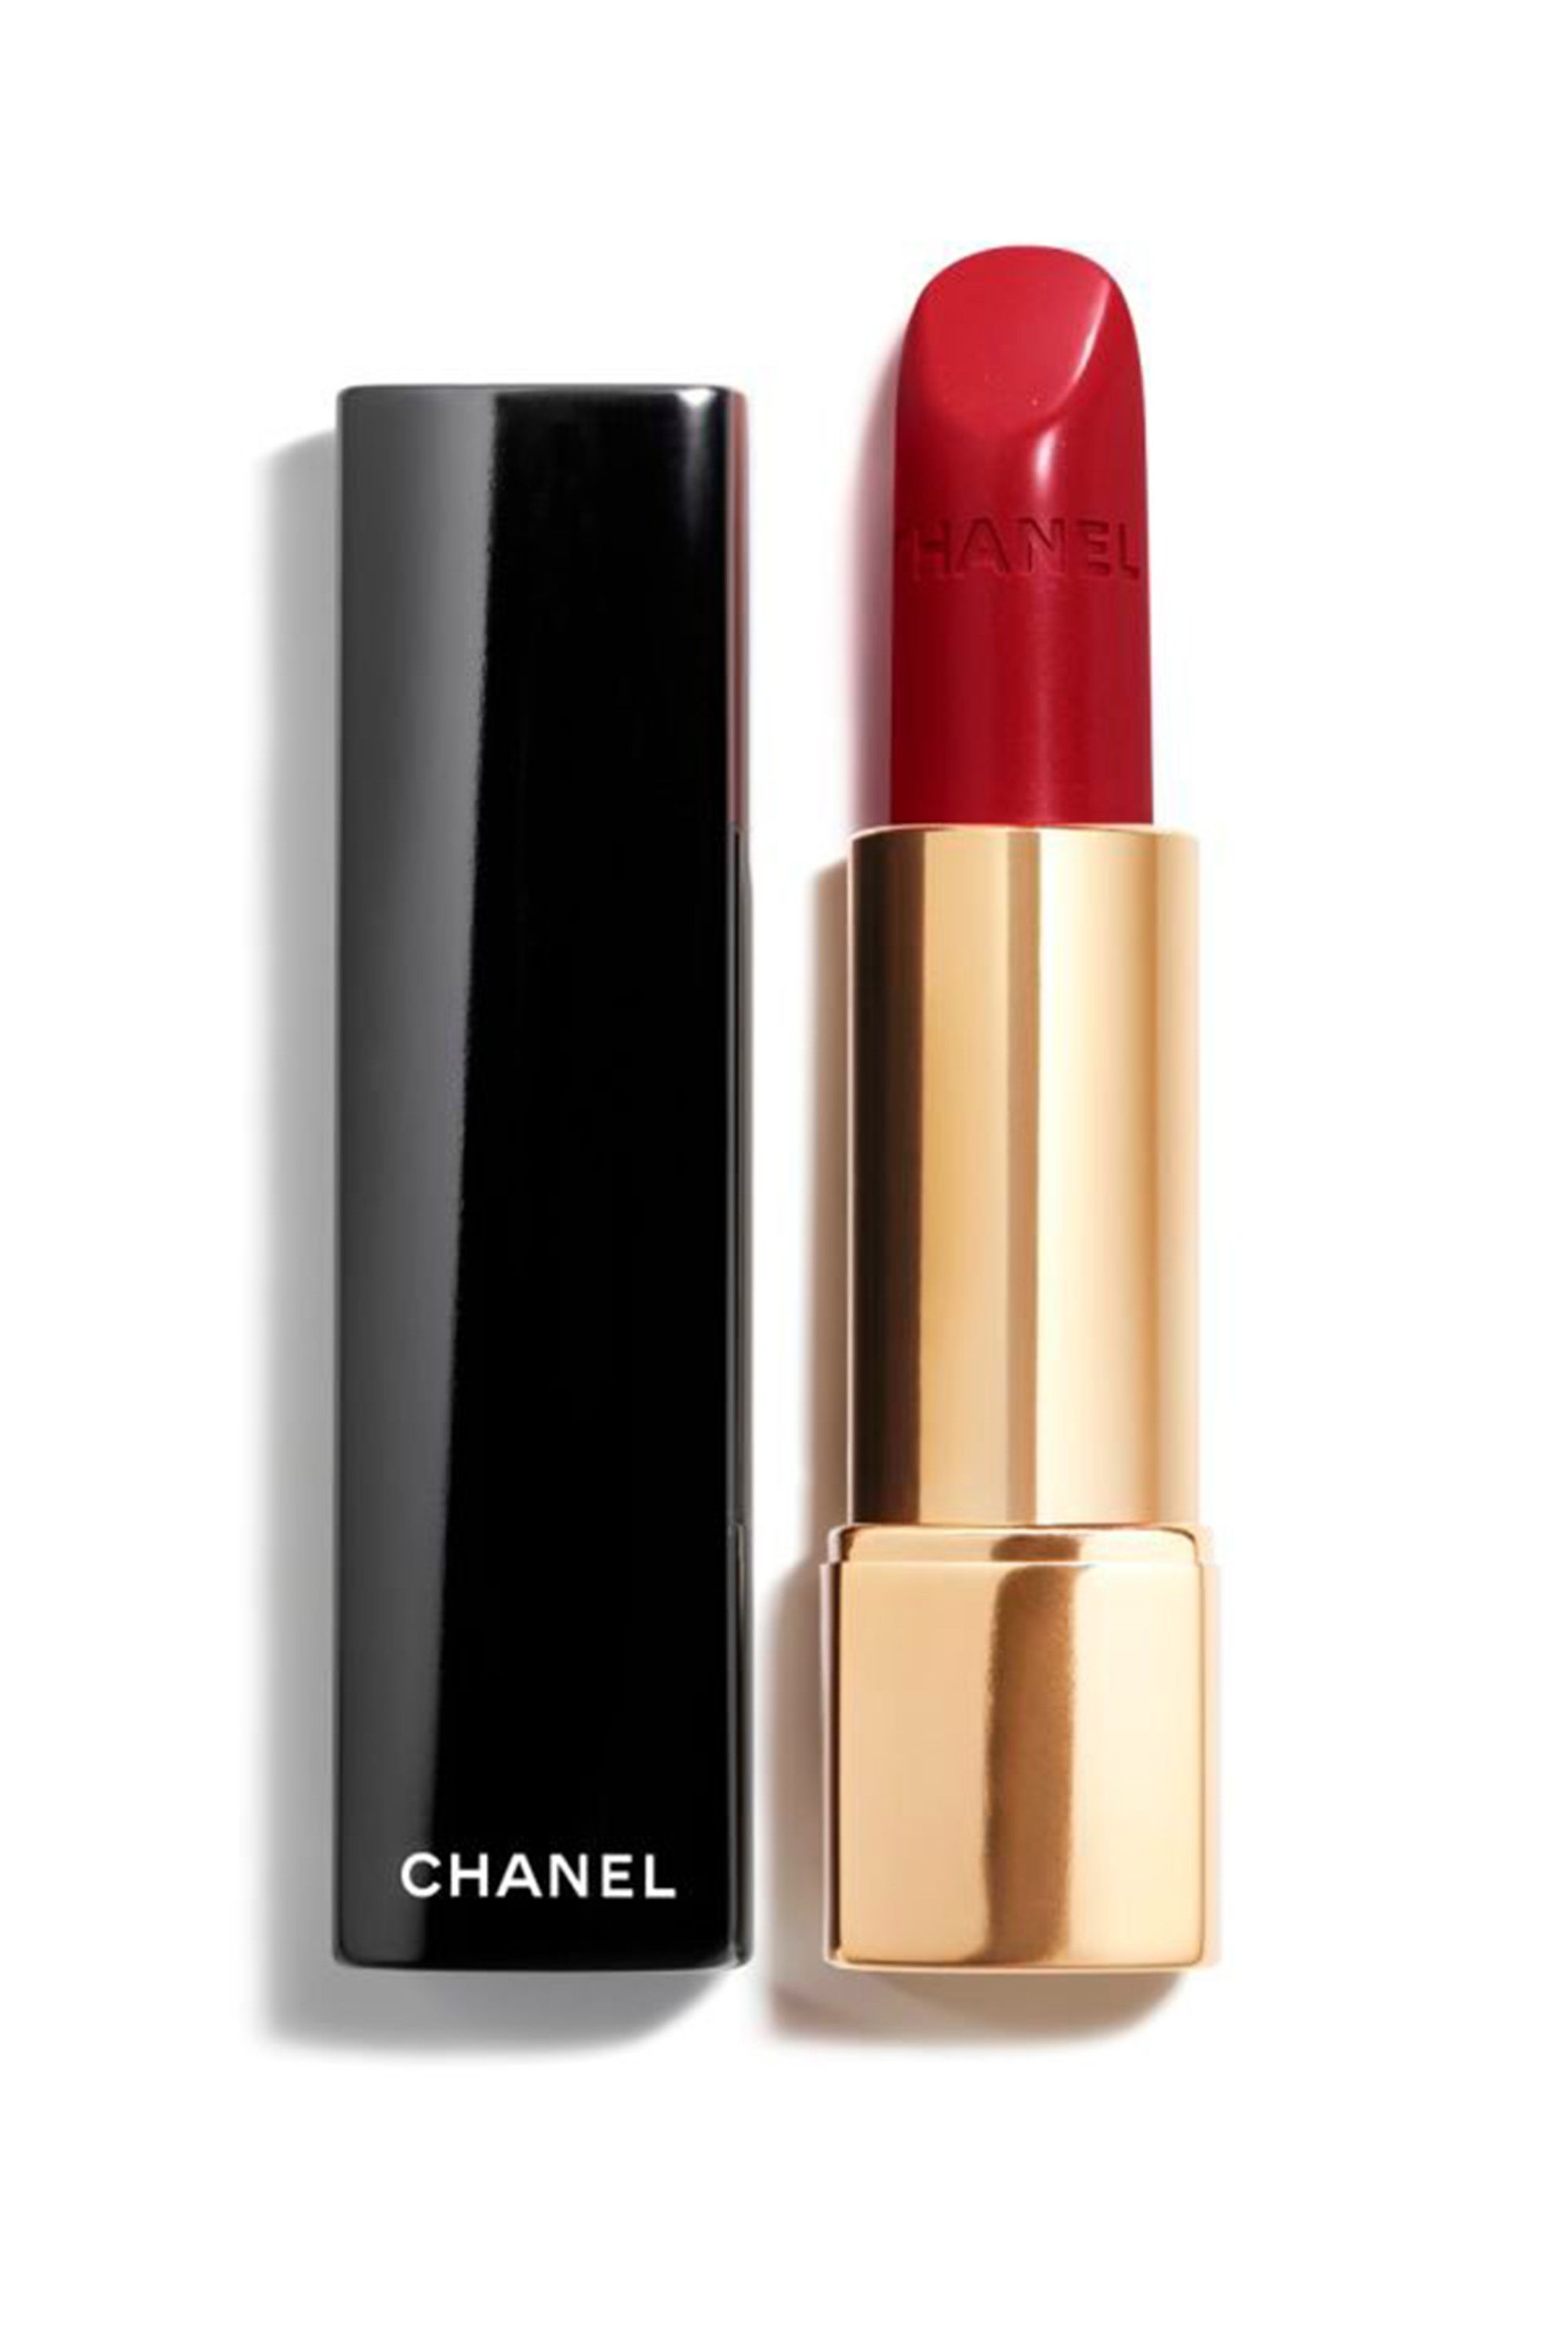 bemanning ontsnappen bemanning BeautyBestSellers | Chanel's 10 best-selling beauty products